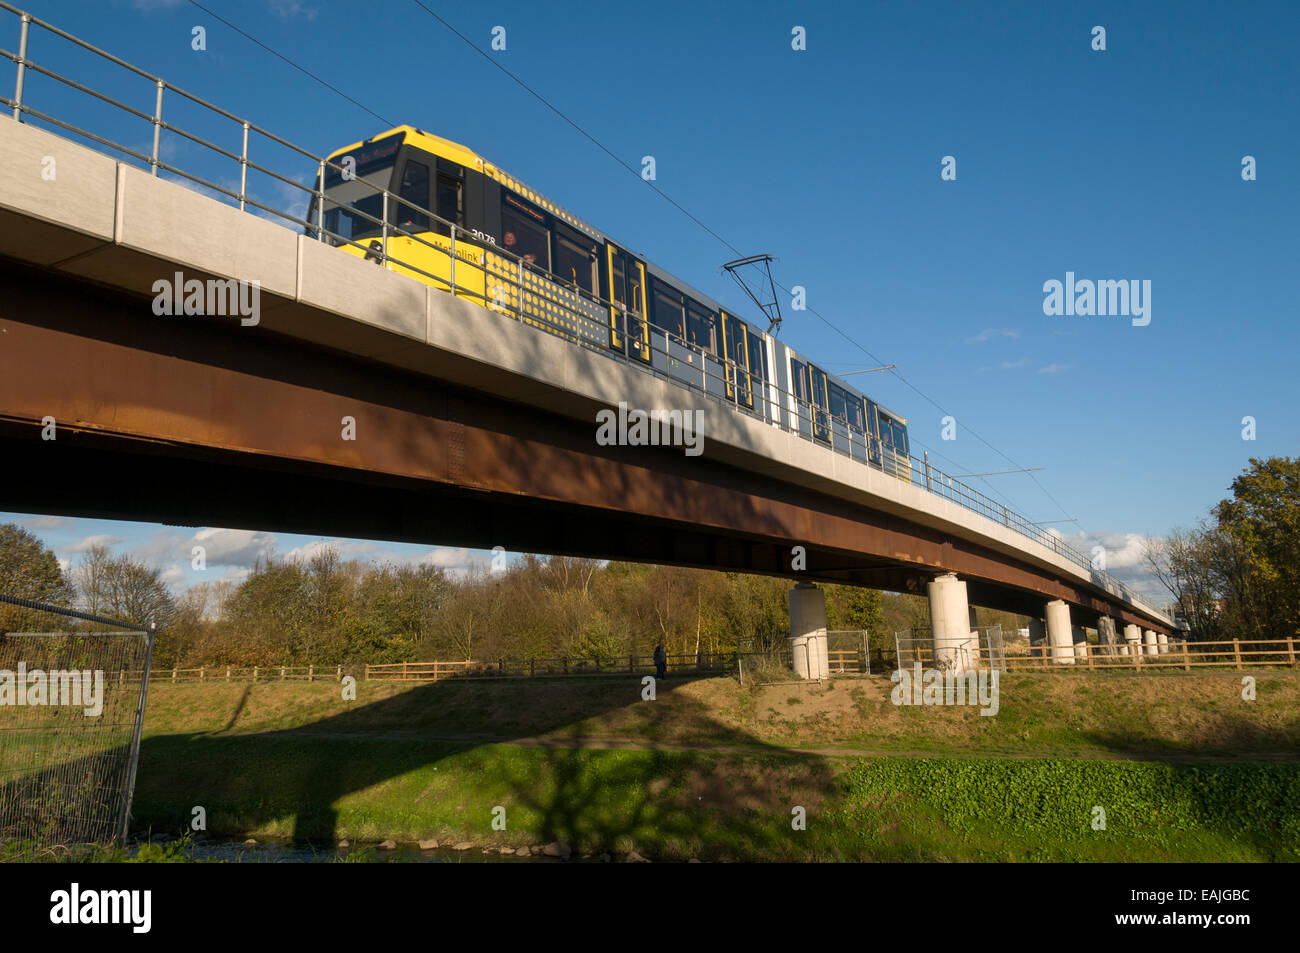 Metrolink tram on the river Mersey viaduct near Jackson's Boat, Airport Line, Manchester, England, UK Stock Photo